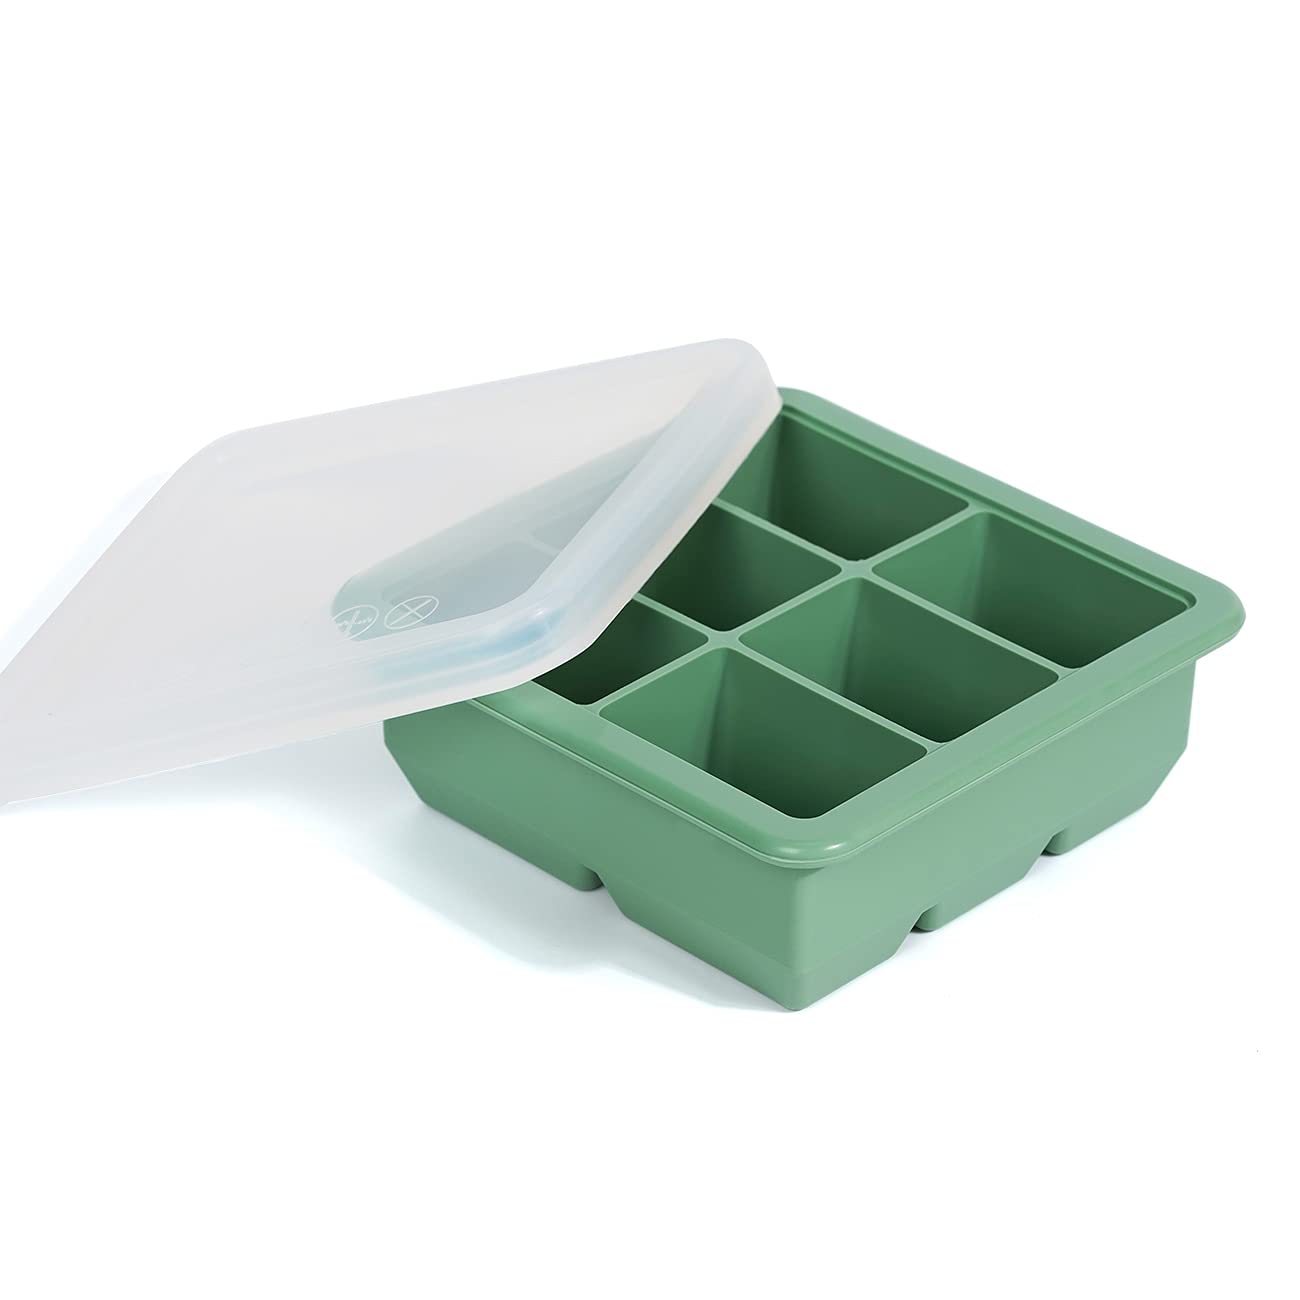 haakaa Baby Food Freezer Tray with Clip-on Lid, Silicone Baby Food Freezer Storage Tray Container, Pop Out 6 x 2.4 oz Portion Silicone Baby Food Ice Cube Trays, Pea Green